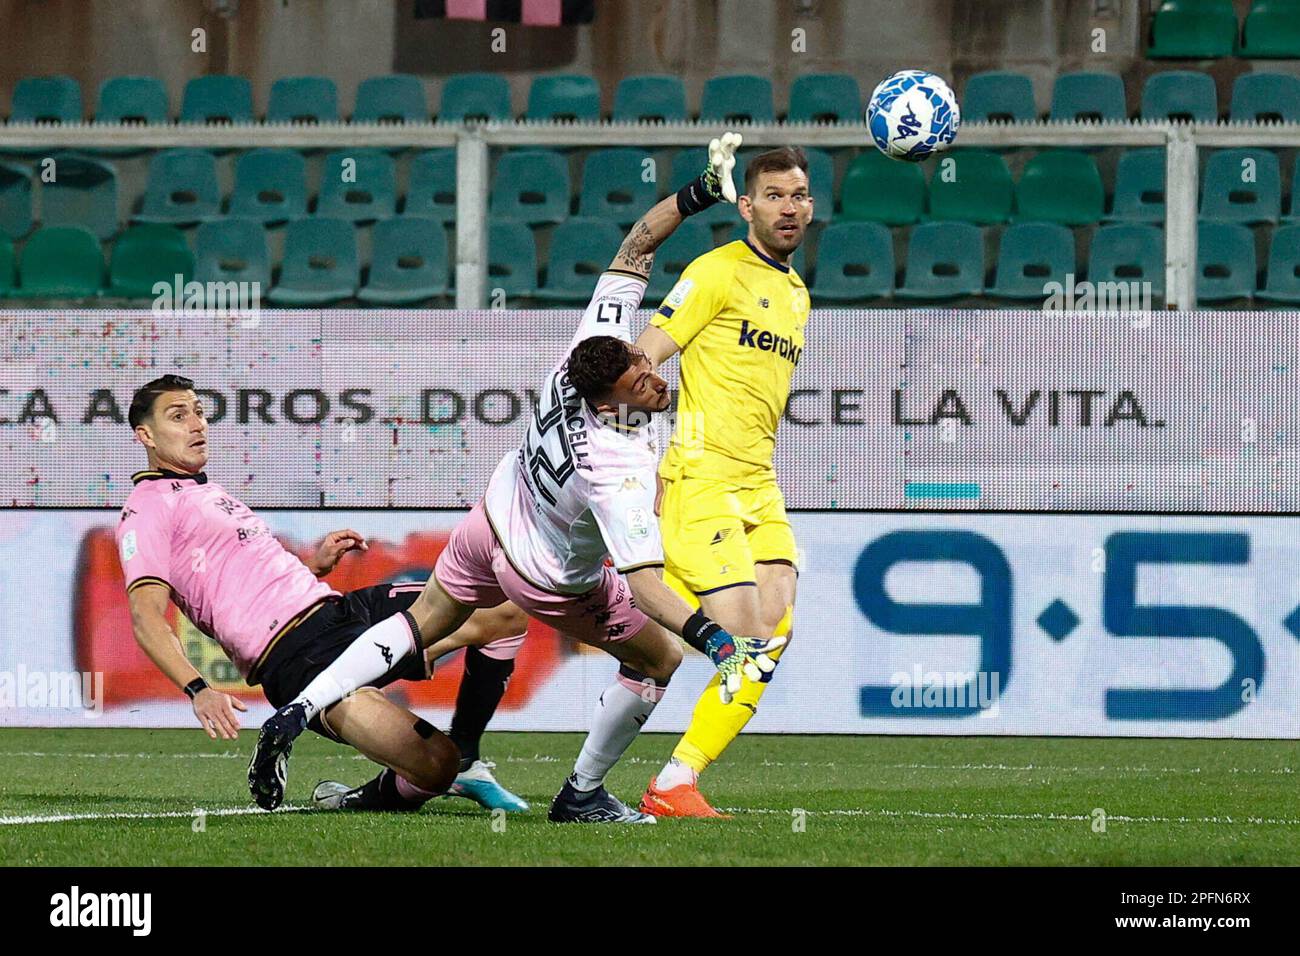 Palermo, Italy. 17th Mar, 2023. Gennaro Tutino (Palermo) celebrates the  victory during Palermo FC vs Modena FC, Italian soccer Serie B match in  Palermo, Italy, March 17 2023 Credit: Independent Photo Agency/Alamy